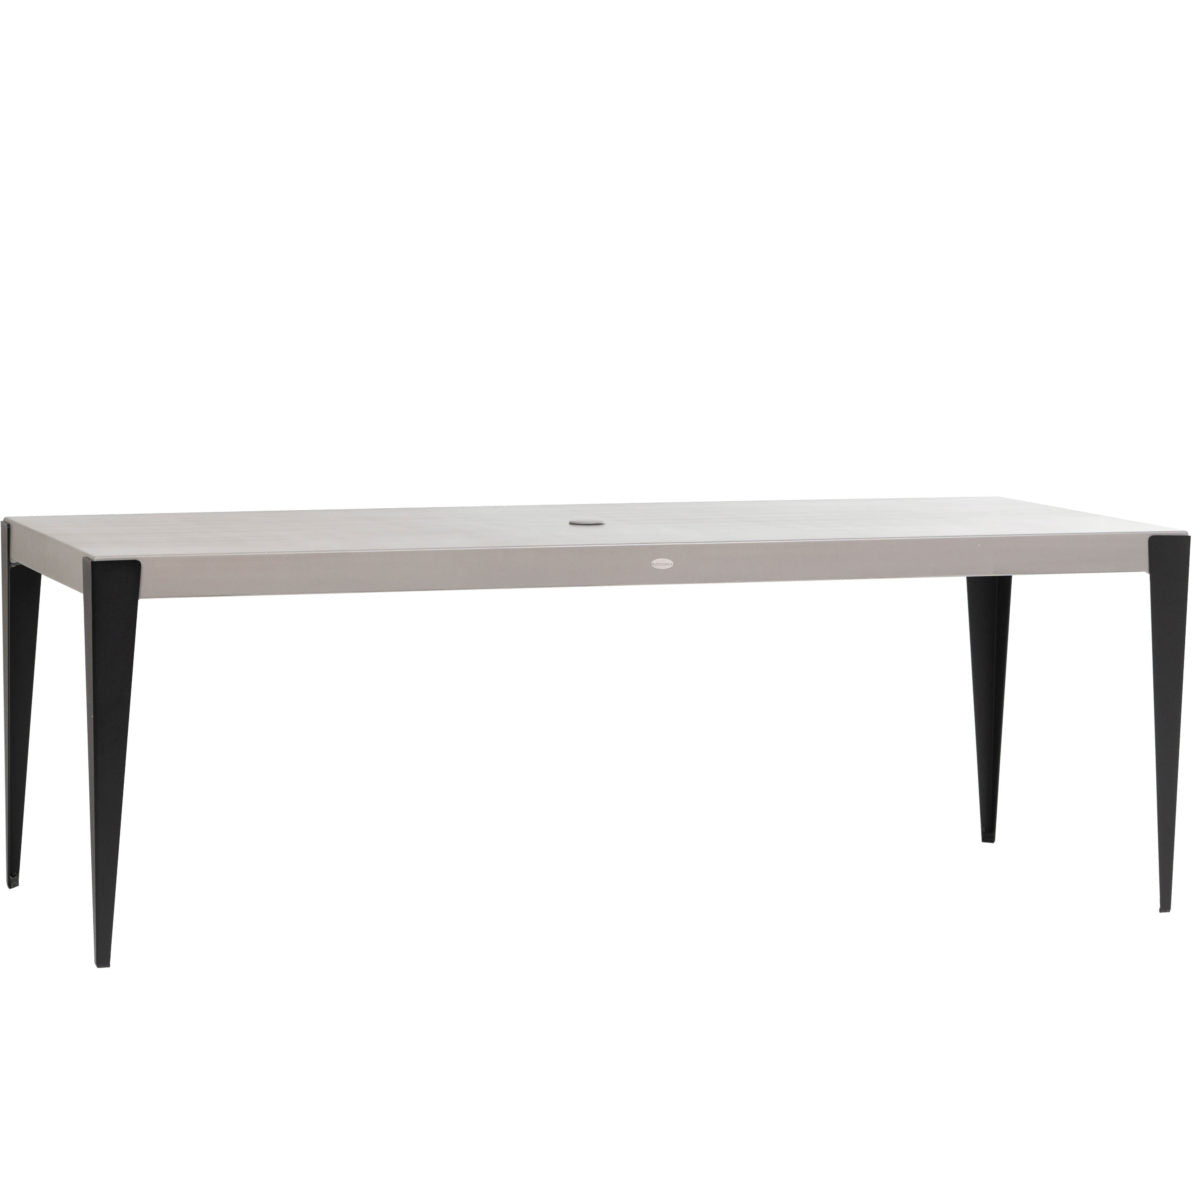 Genval 84.5"x38" Dining Table